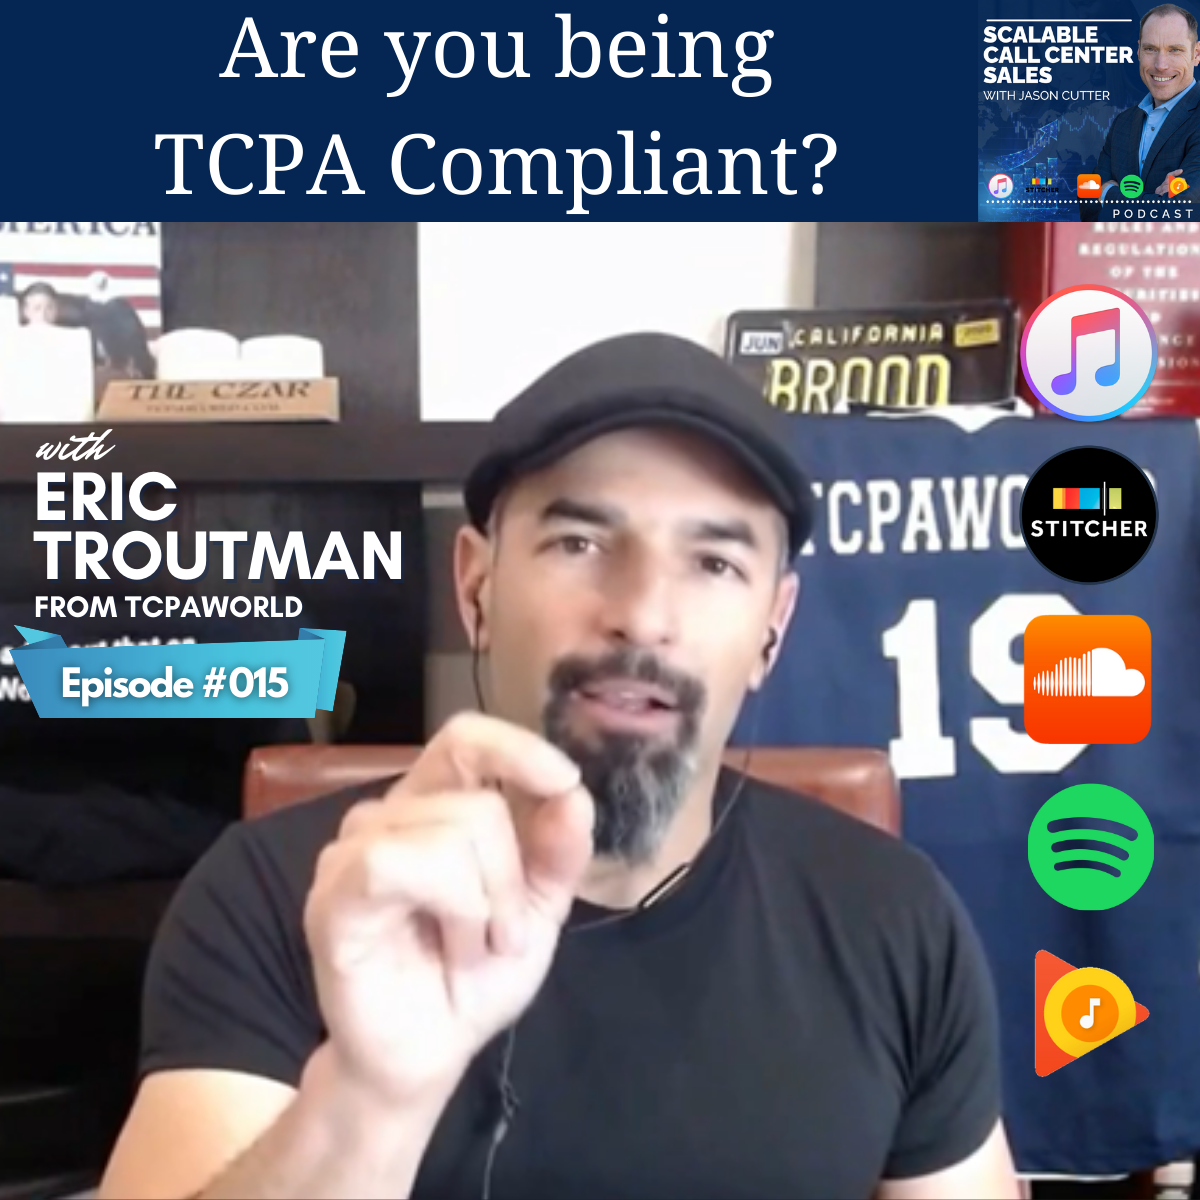 [015] Are You Being TCPA Compliant? with Eric Troutman – the CZAR of TCPAWorld